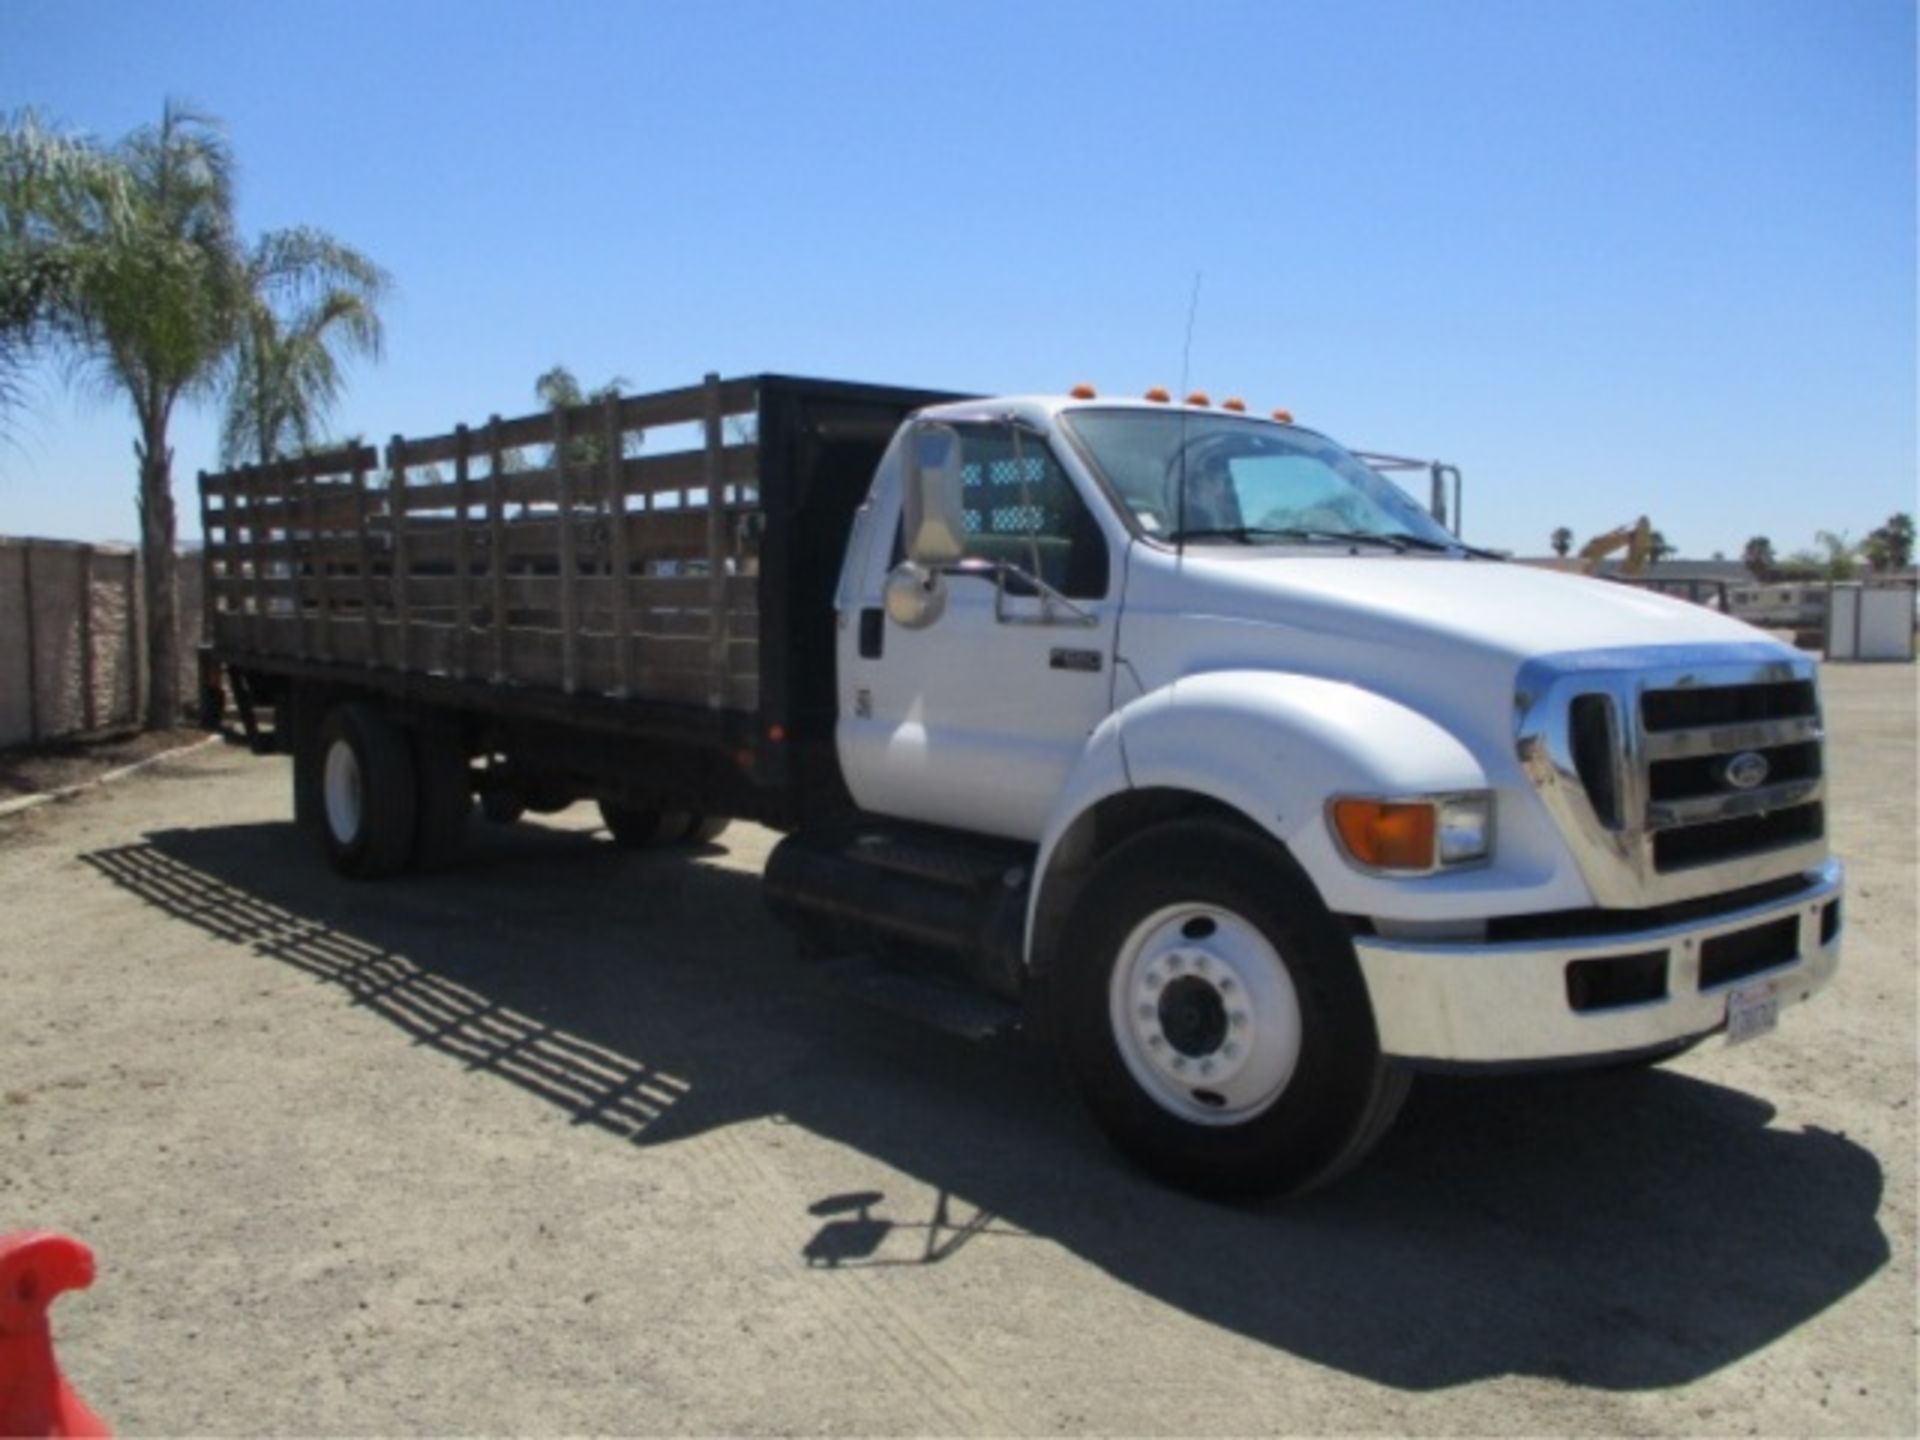 2005 Ford F650 S/A Flatbed Stakebed Truck, Cat C7 Acert 7.2L 6-Cyl Diesel, Automatic, Lift Gate, 24' - Image 11 of 61